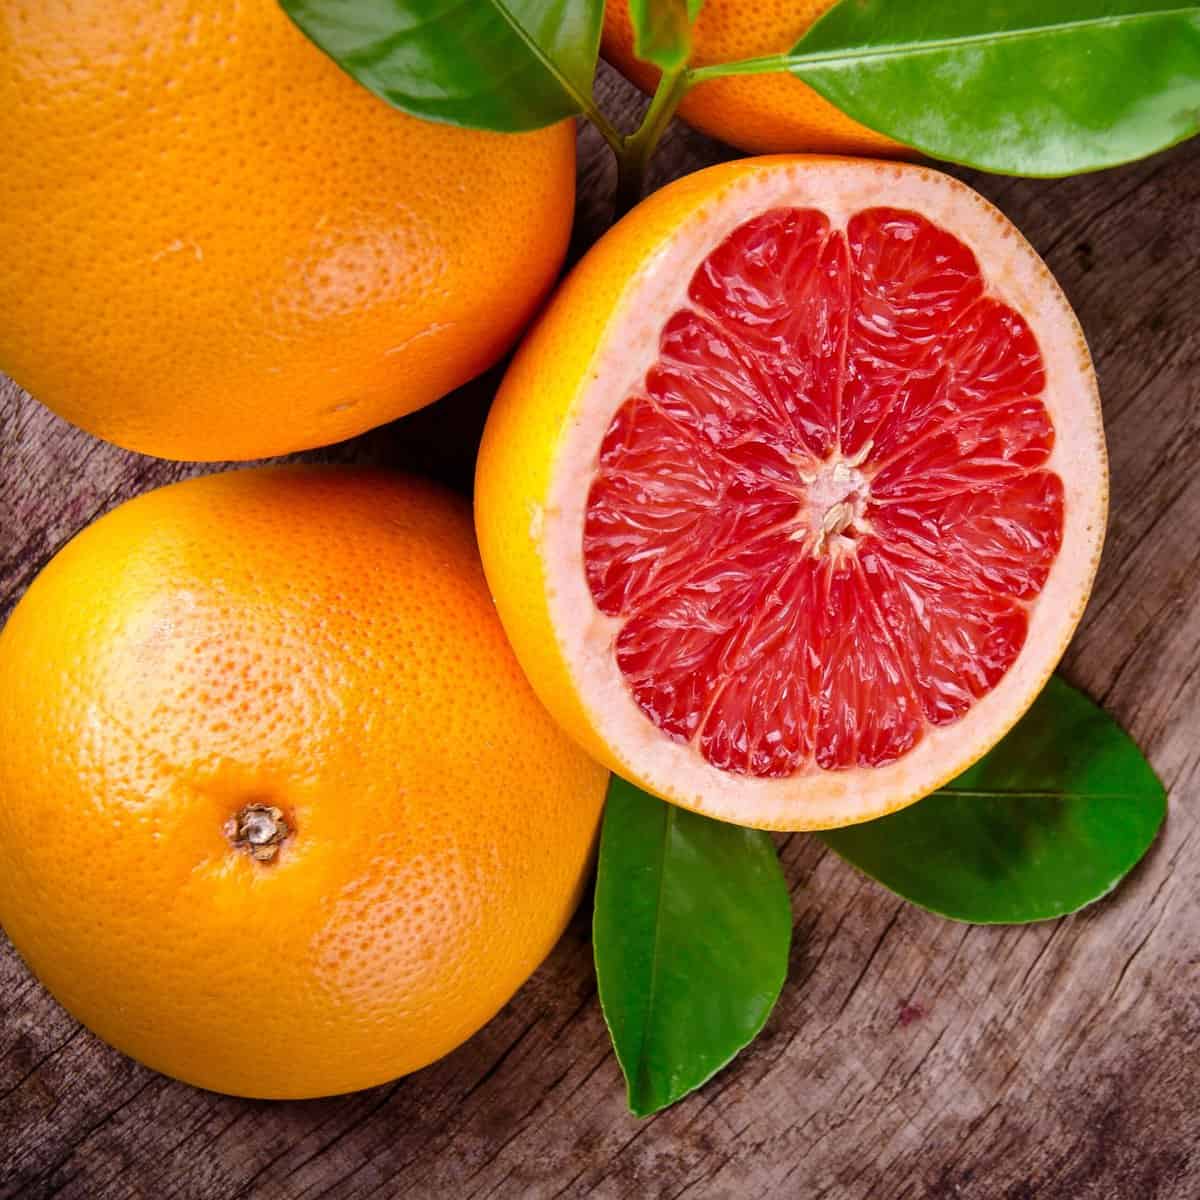 fruit that starts with g featured image.